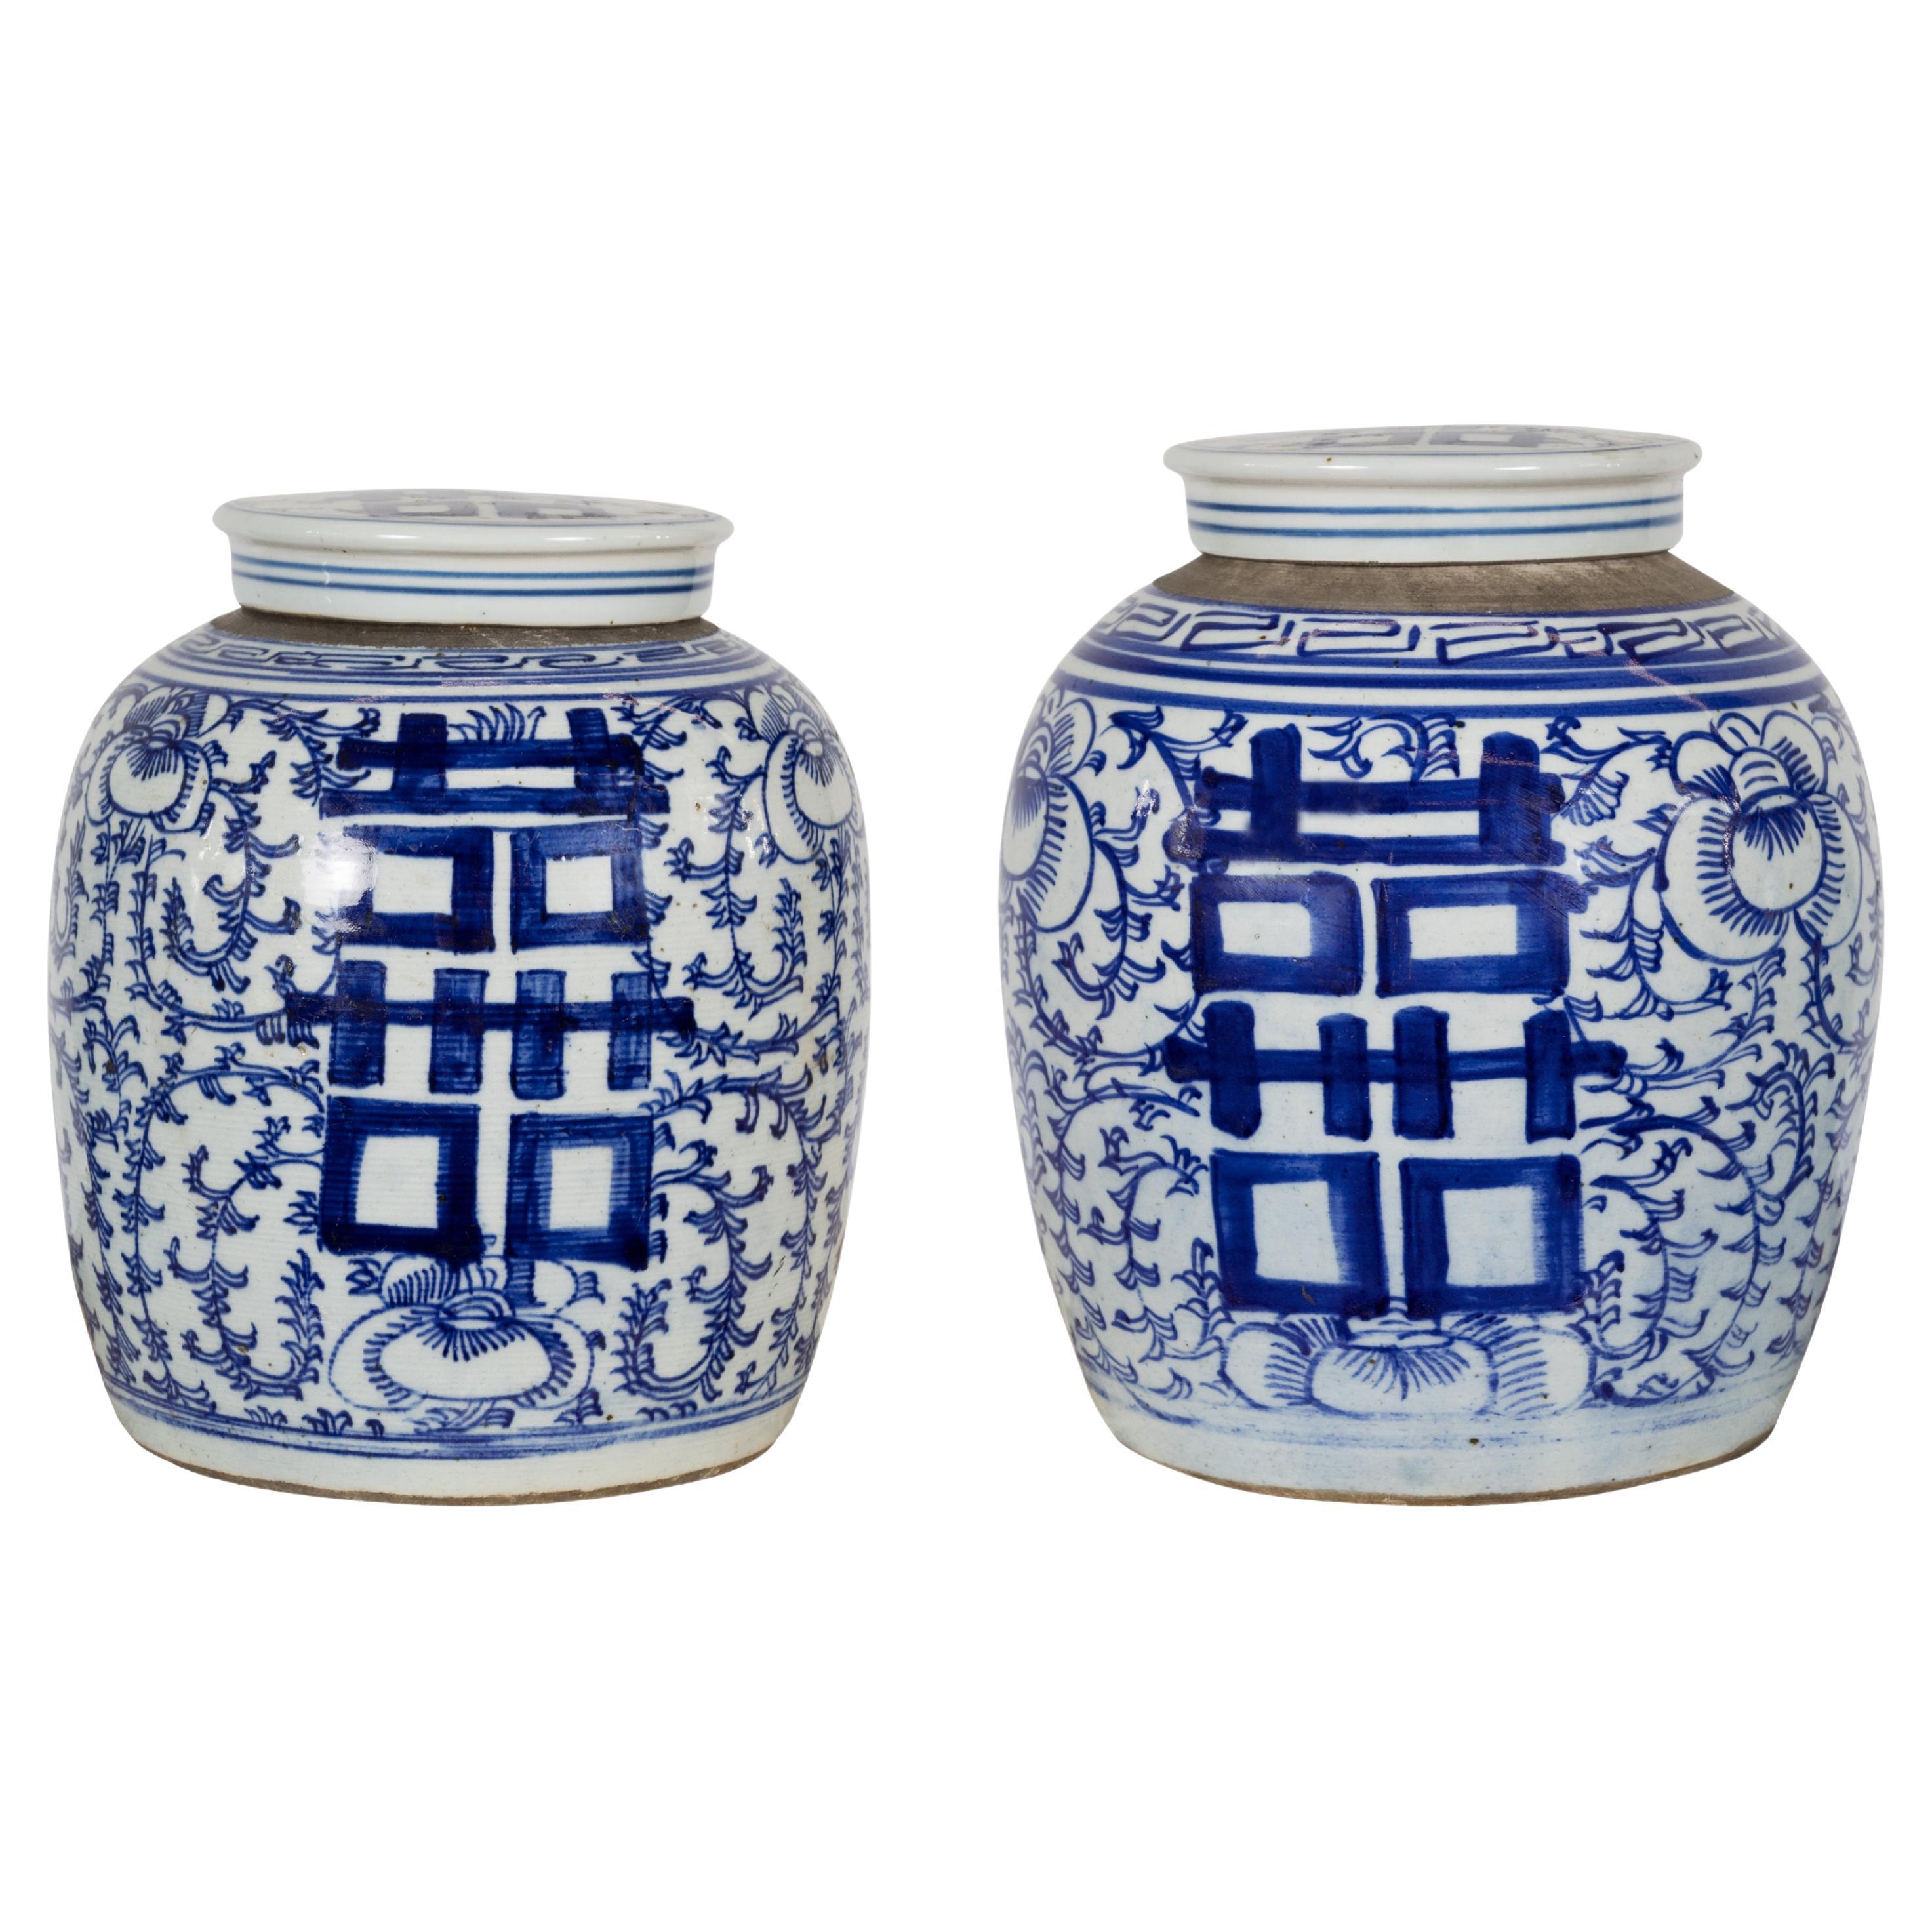 Near Pair of White and Blue Porcelain Double Happiness Lidded Ginger Jars For Sale